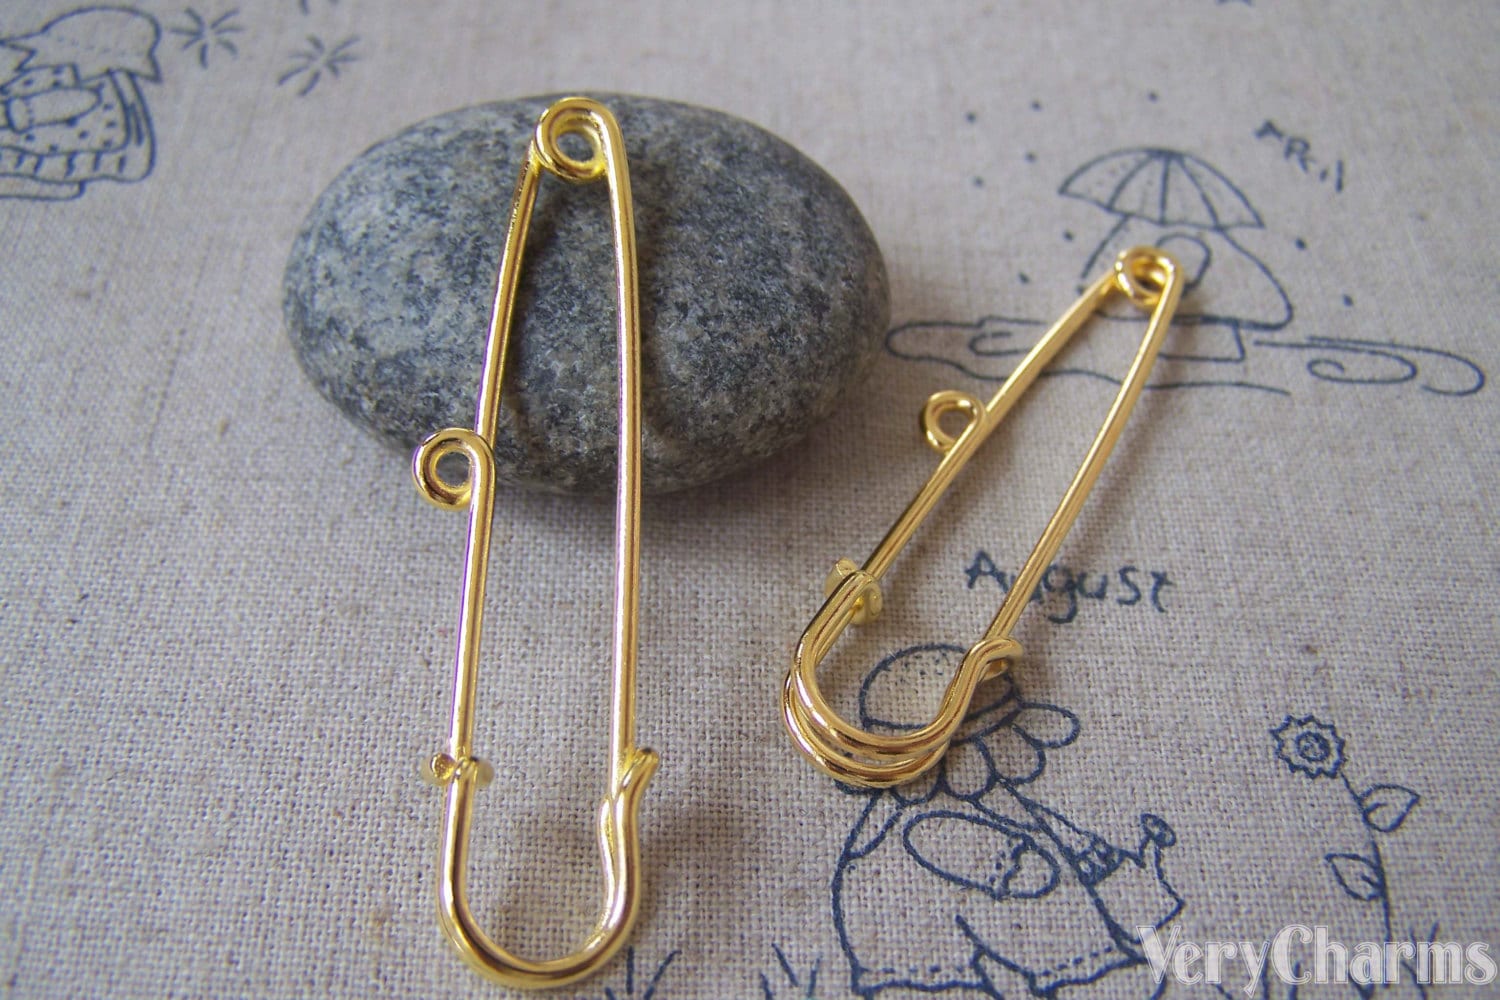 2 Inch Length Three Loop Safety Pin 51mm Antique Brass Plaid 